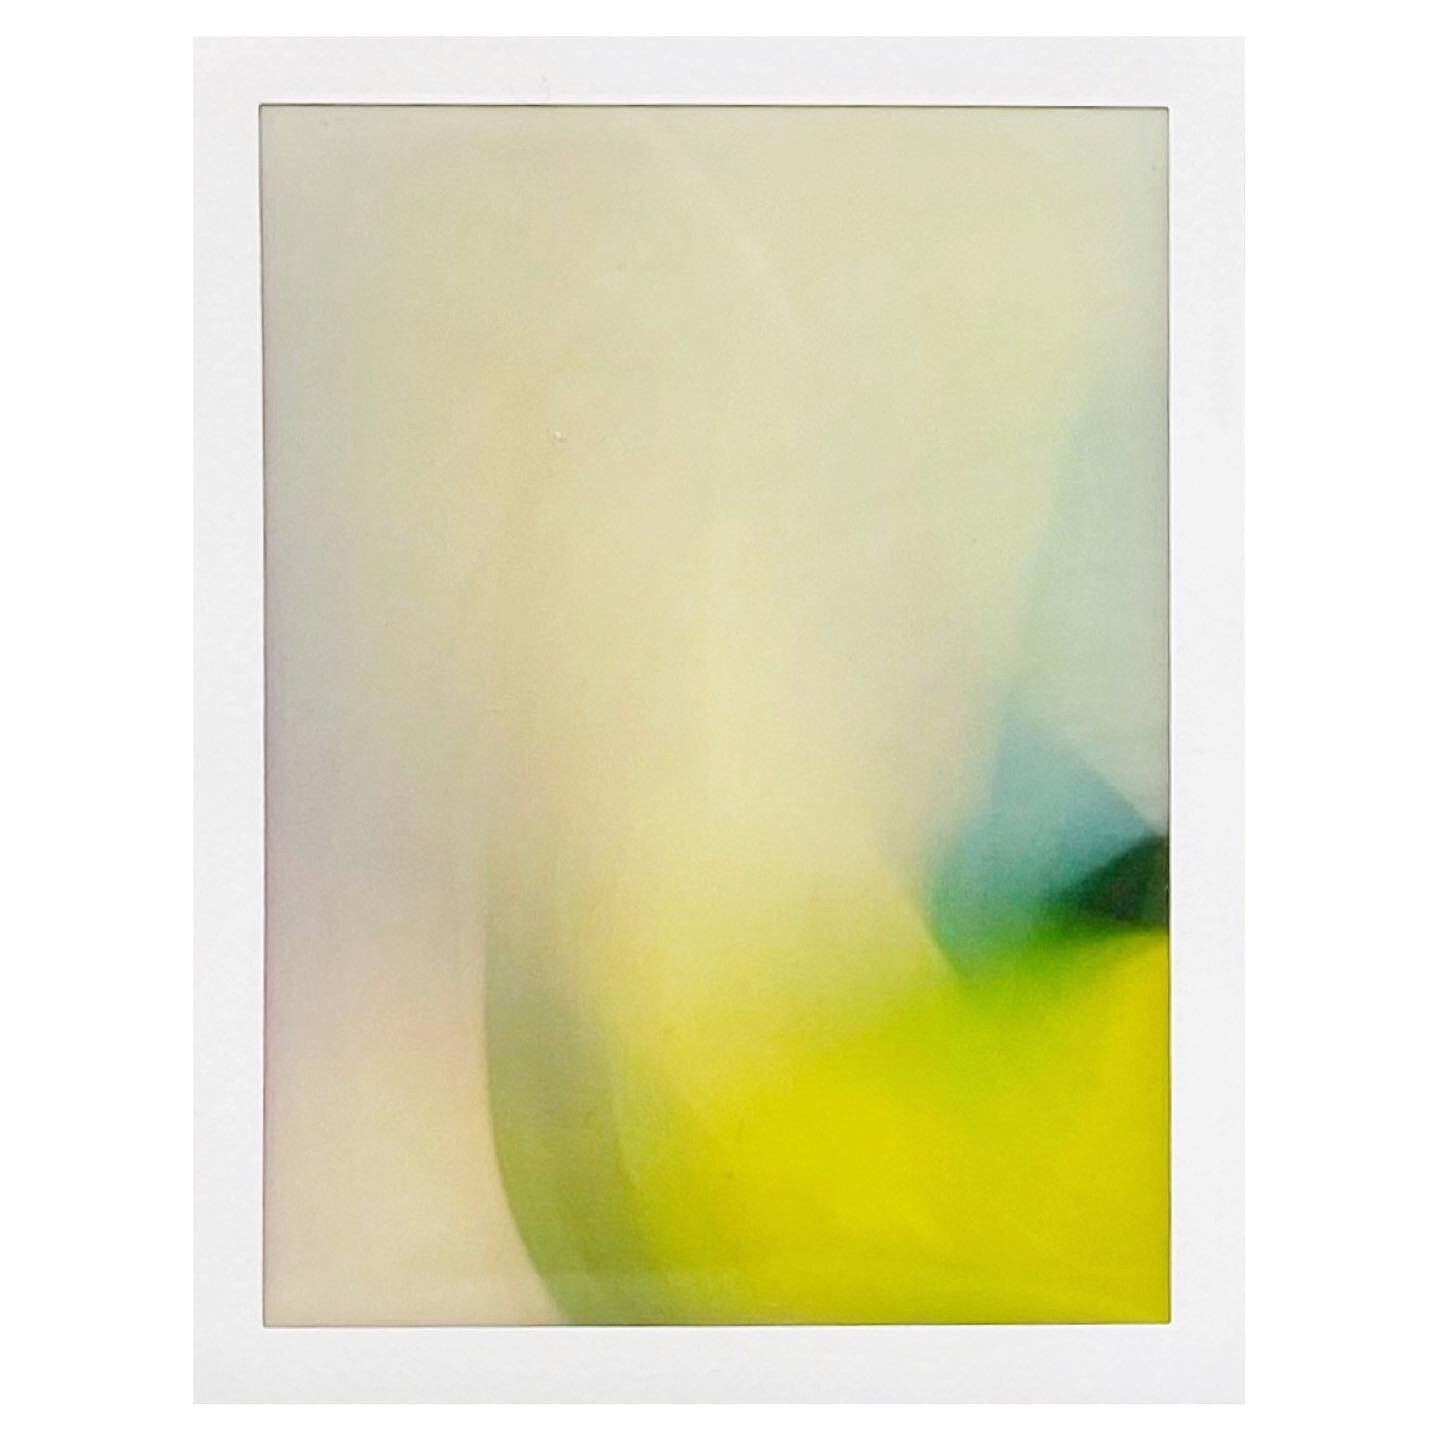 Little bit obsessed with this limey green at the moment. That is all

#cameraless #cameralessphotography #lenslessphotography #abstractphotography #abstractart #colourfield #colorfield #nonobjectiveart #experimentalphotography #instax #instantfilm #e